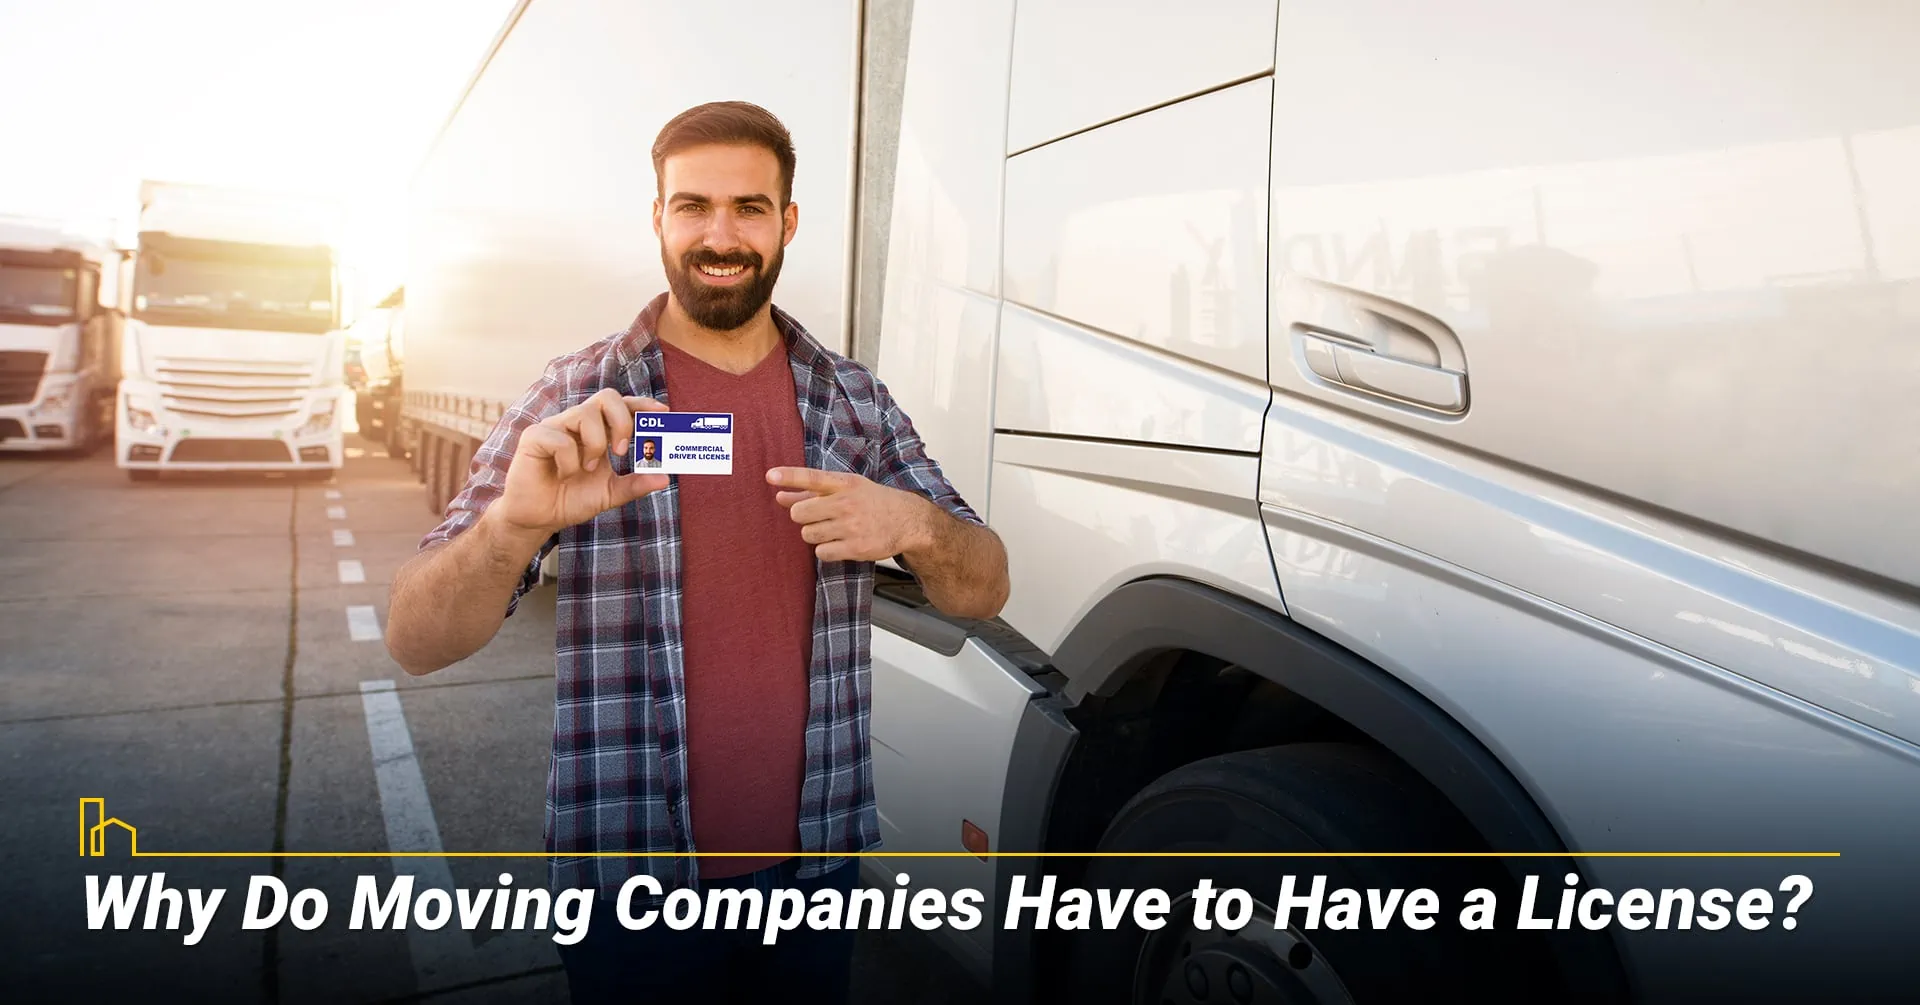 Why Do Moving Companies Have to Have a License?